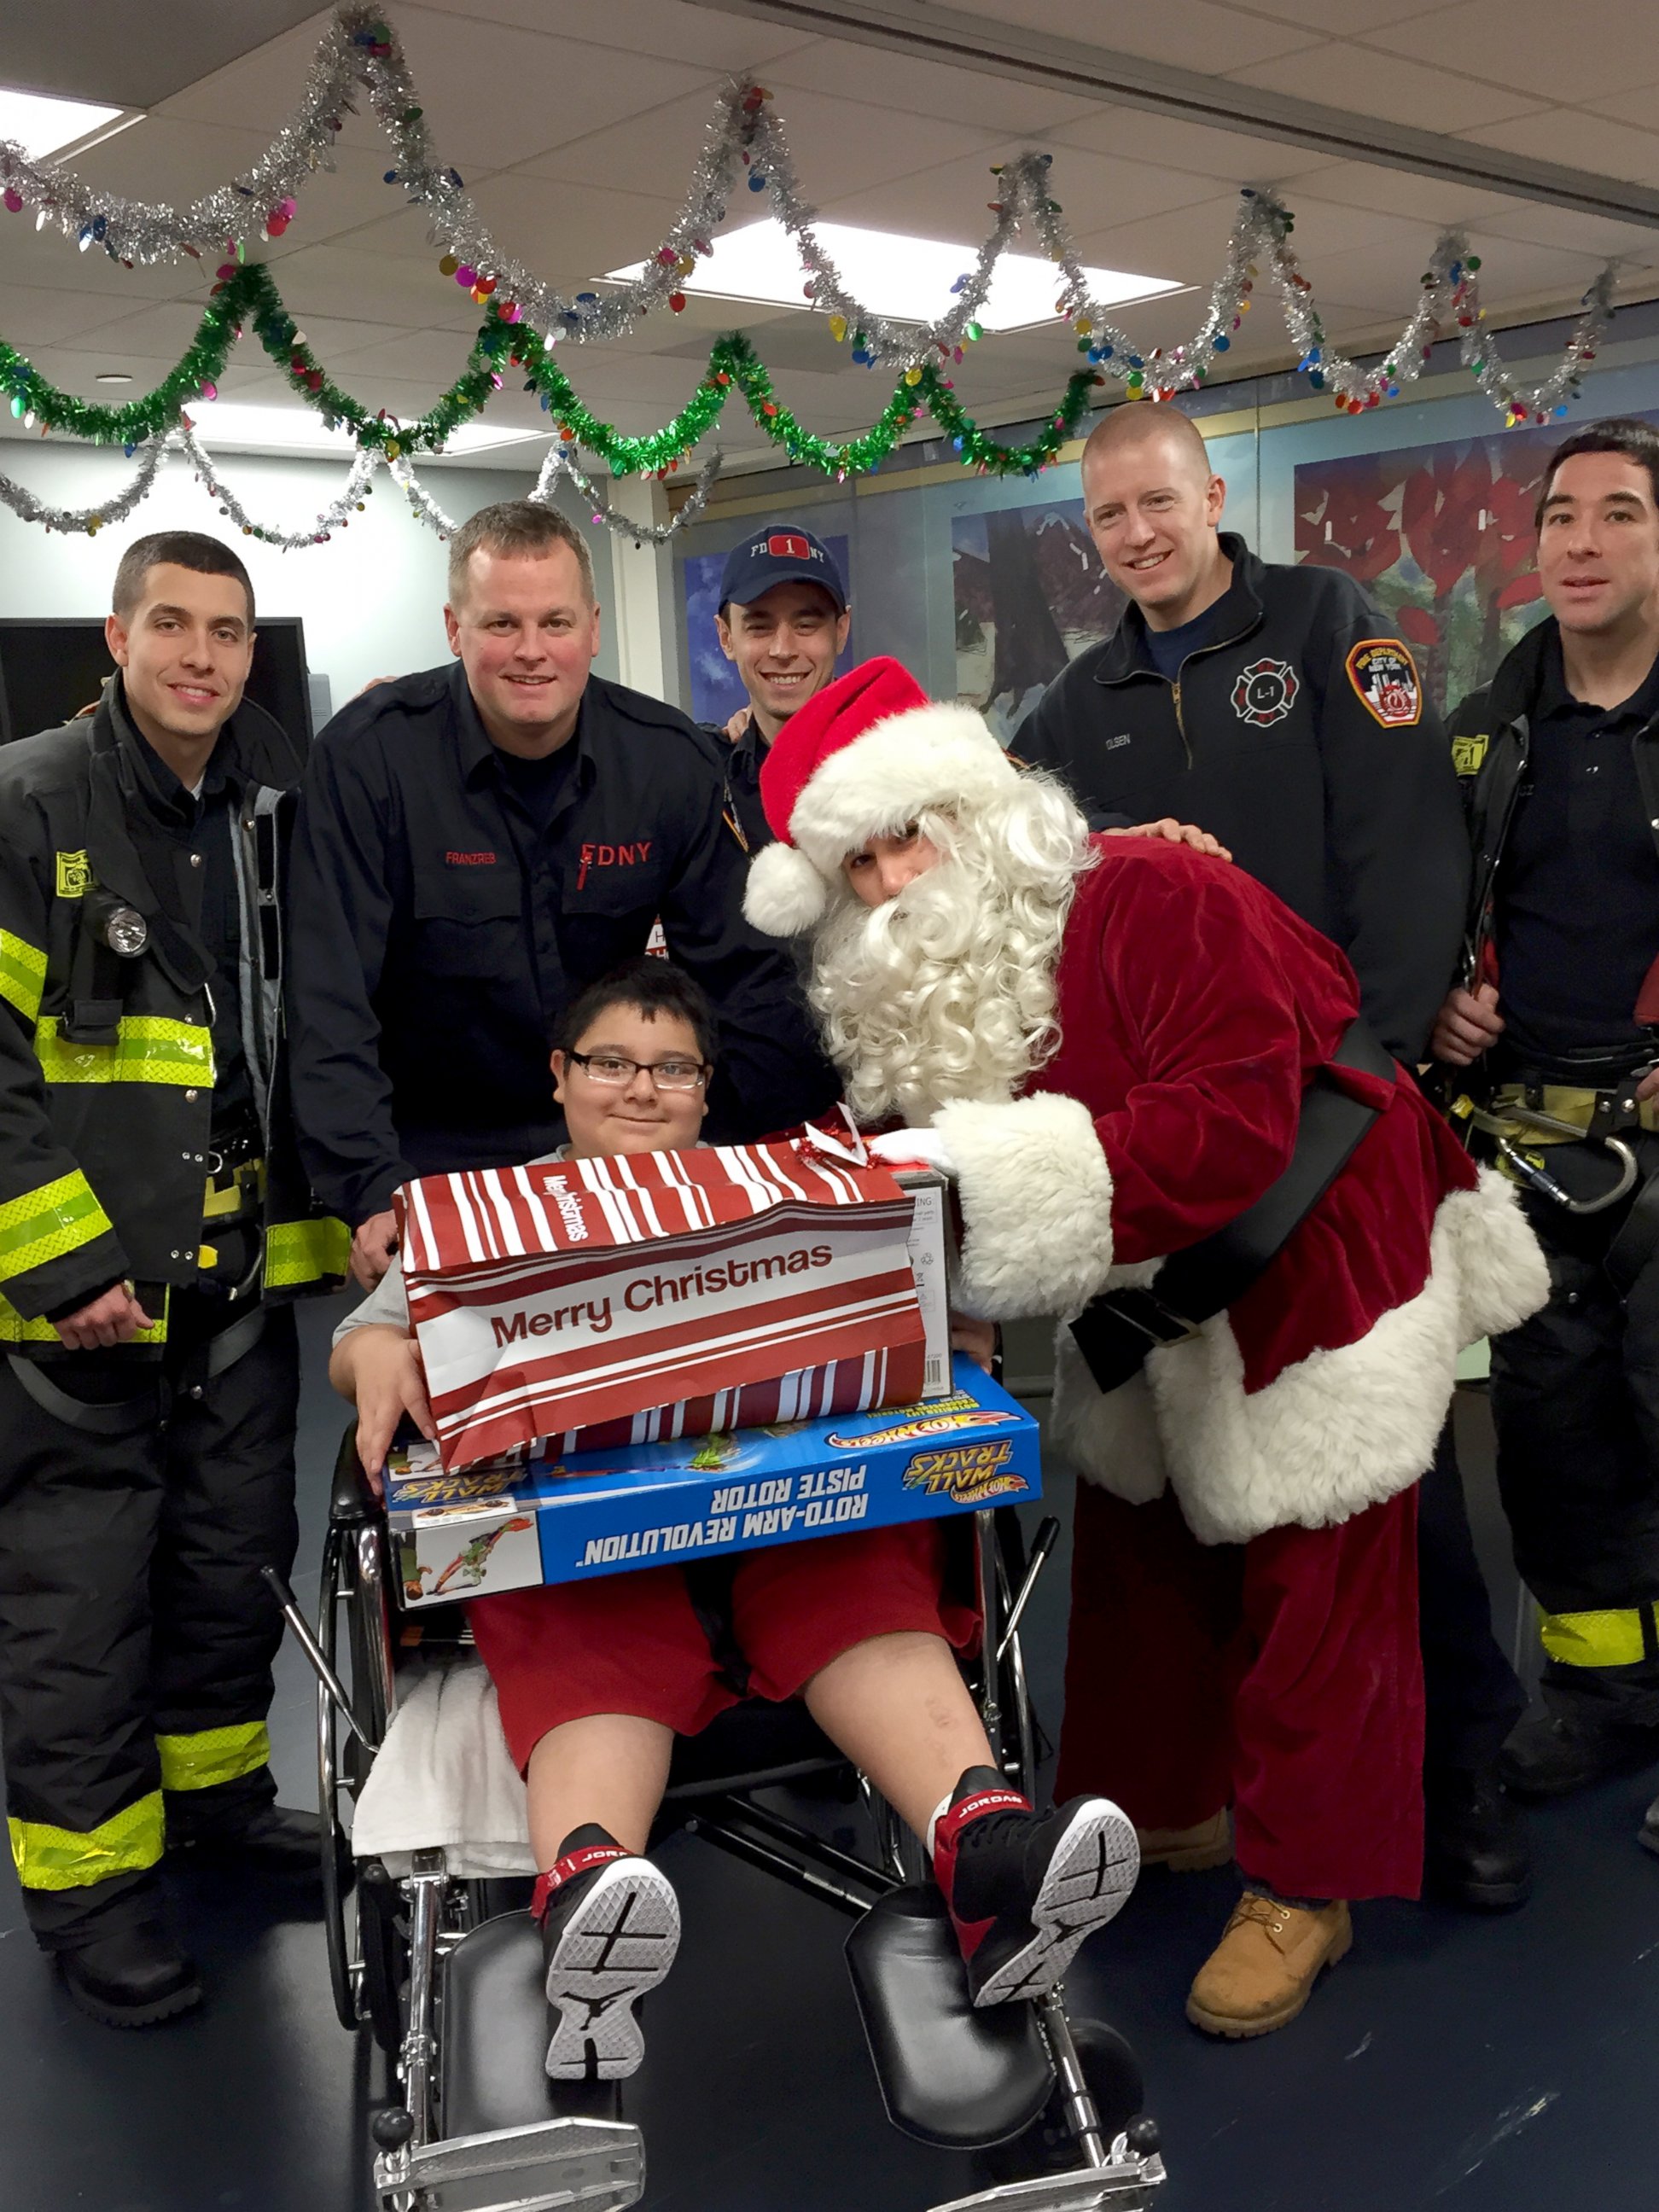 PHOTO: Santa visited NYU Langone patients today with his helpers: New York City firefighters.